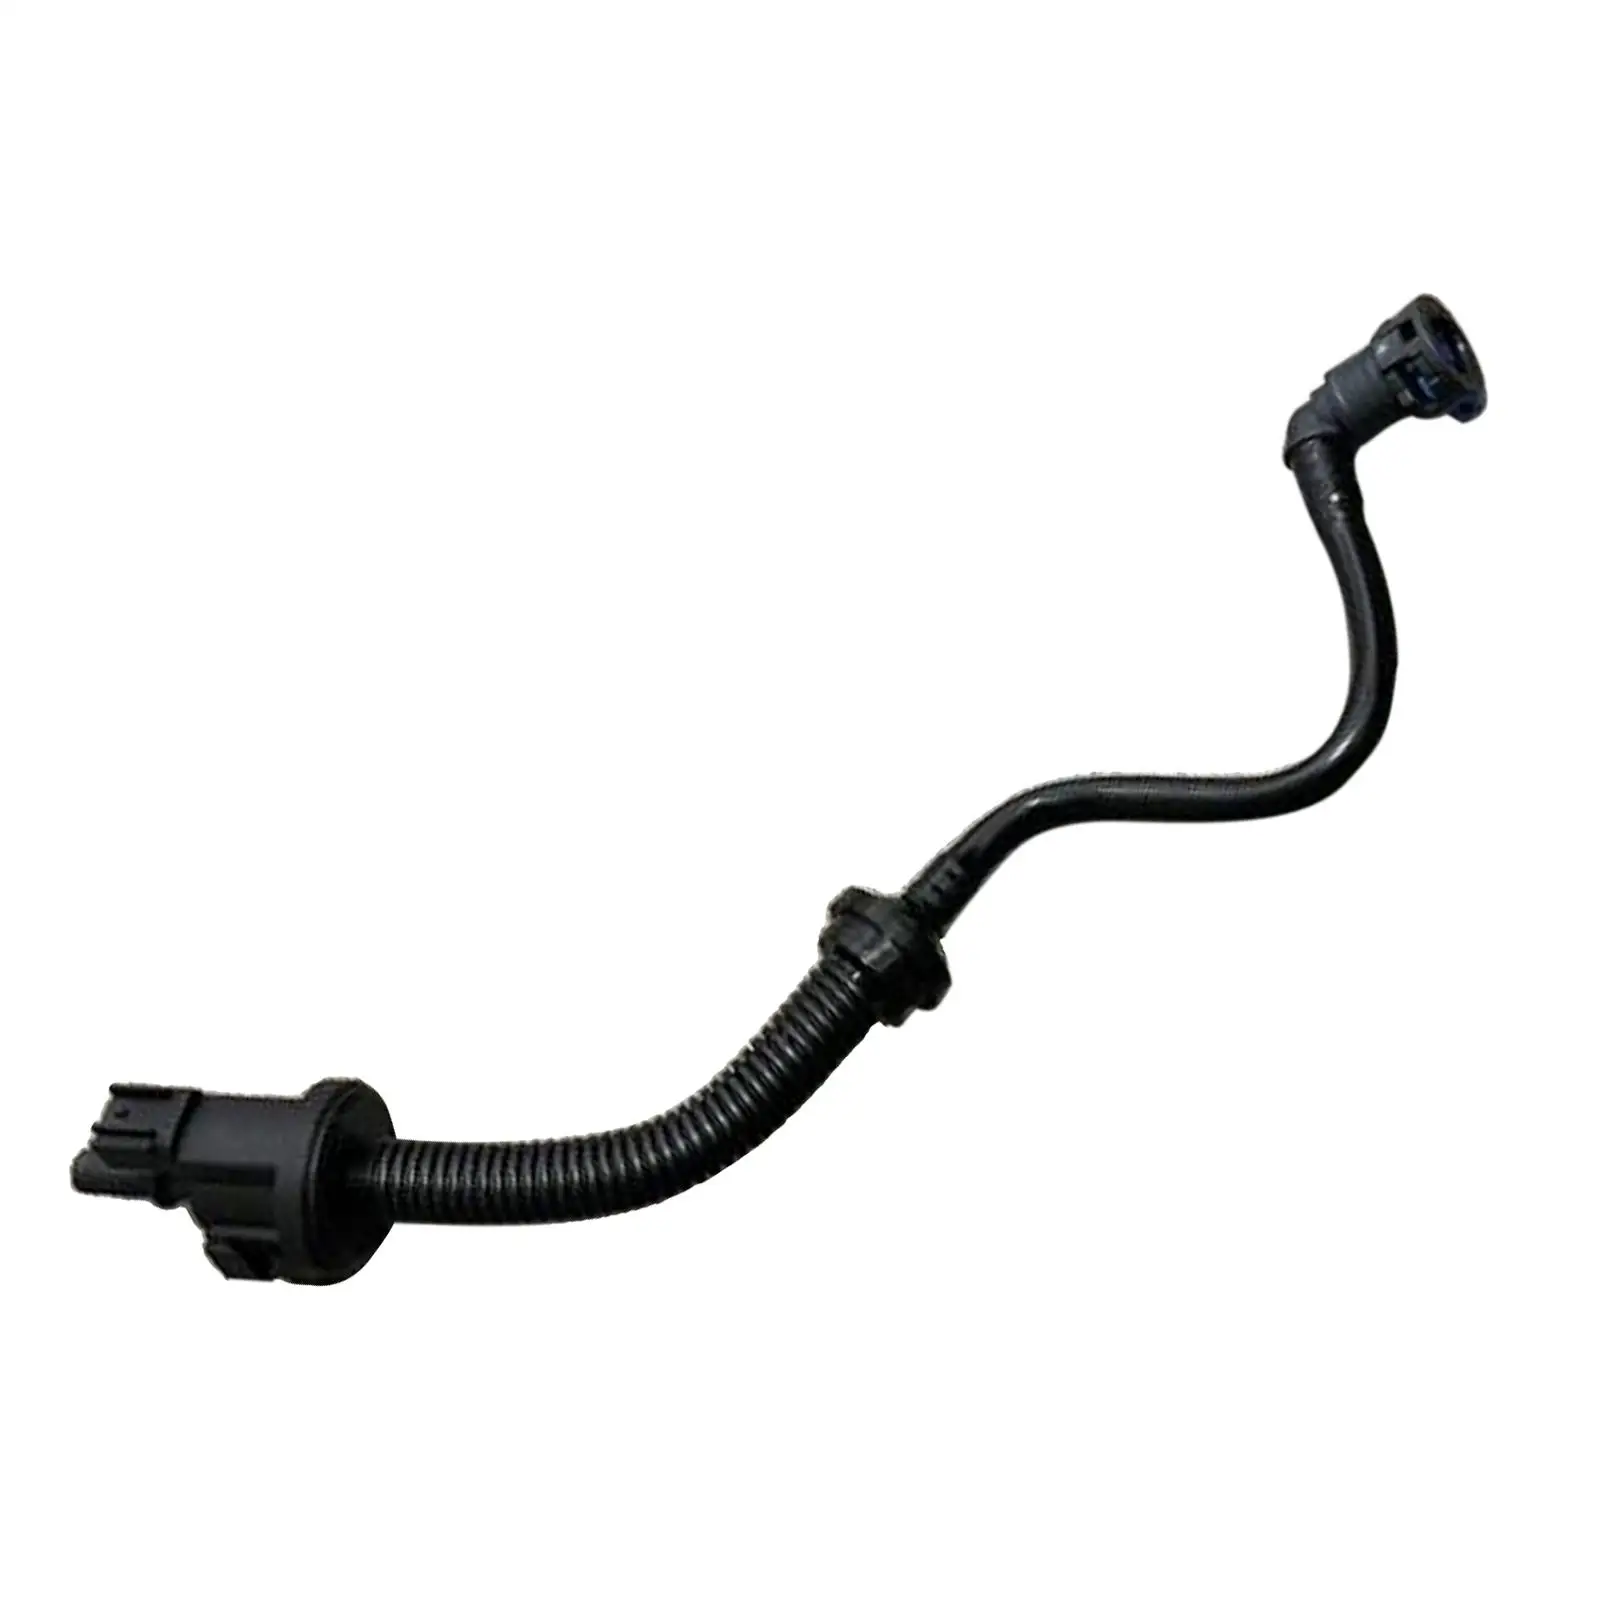 Car Fuel Vapour Hose for Ford Mustang 2-Door 2.3 Ecoboost 2015-2019